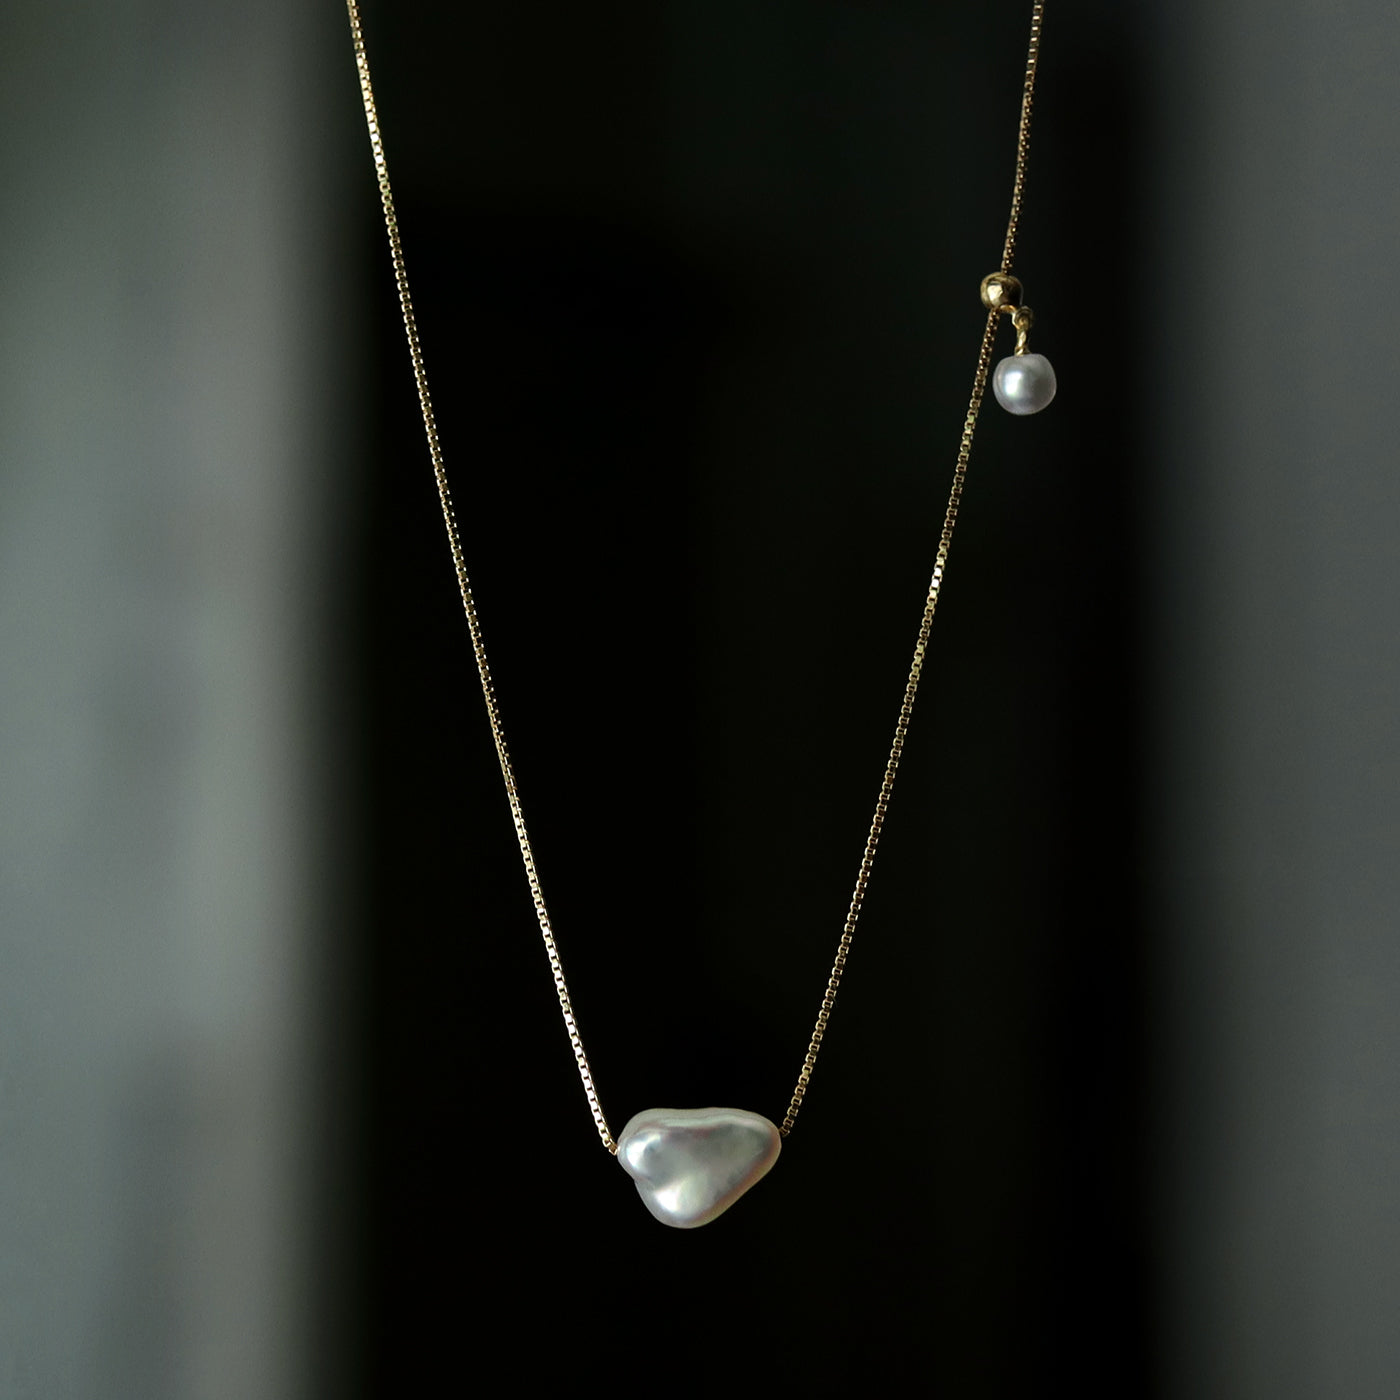 Wandering Pearl Chain Necklace - アコヤケシ #B